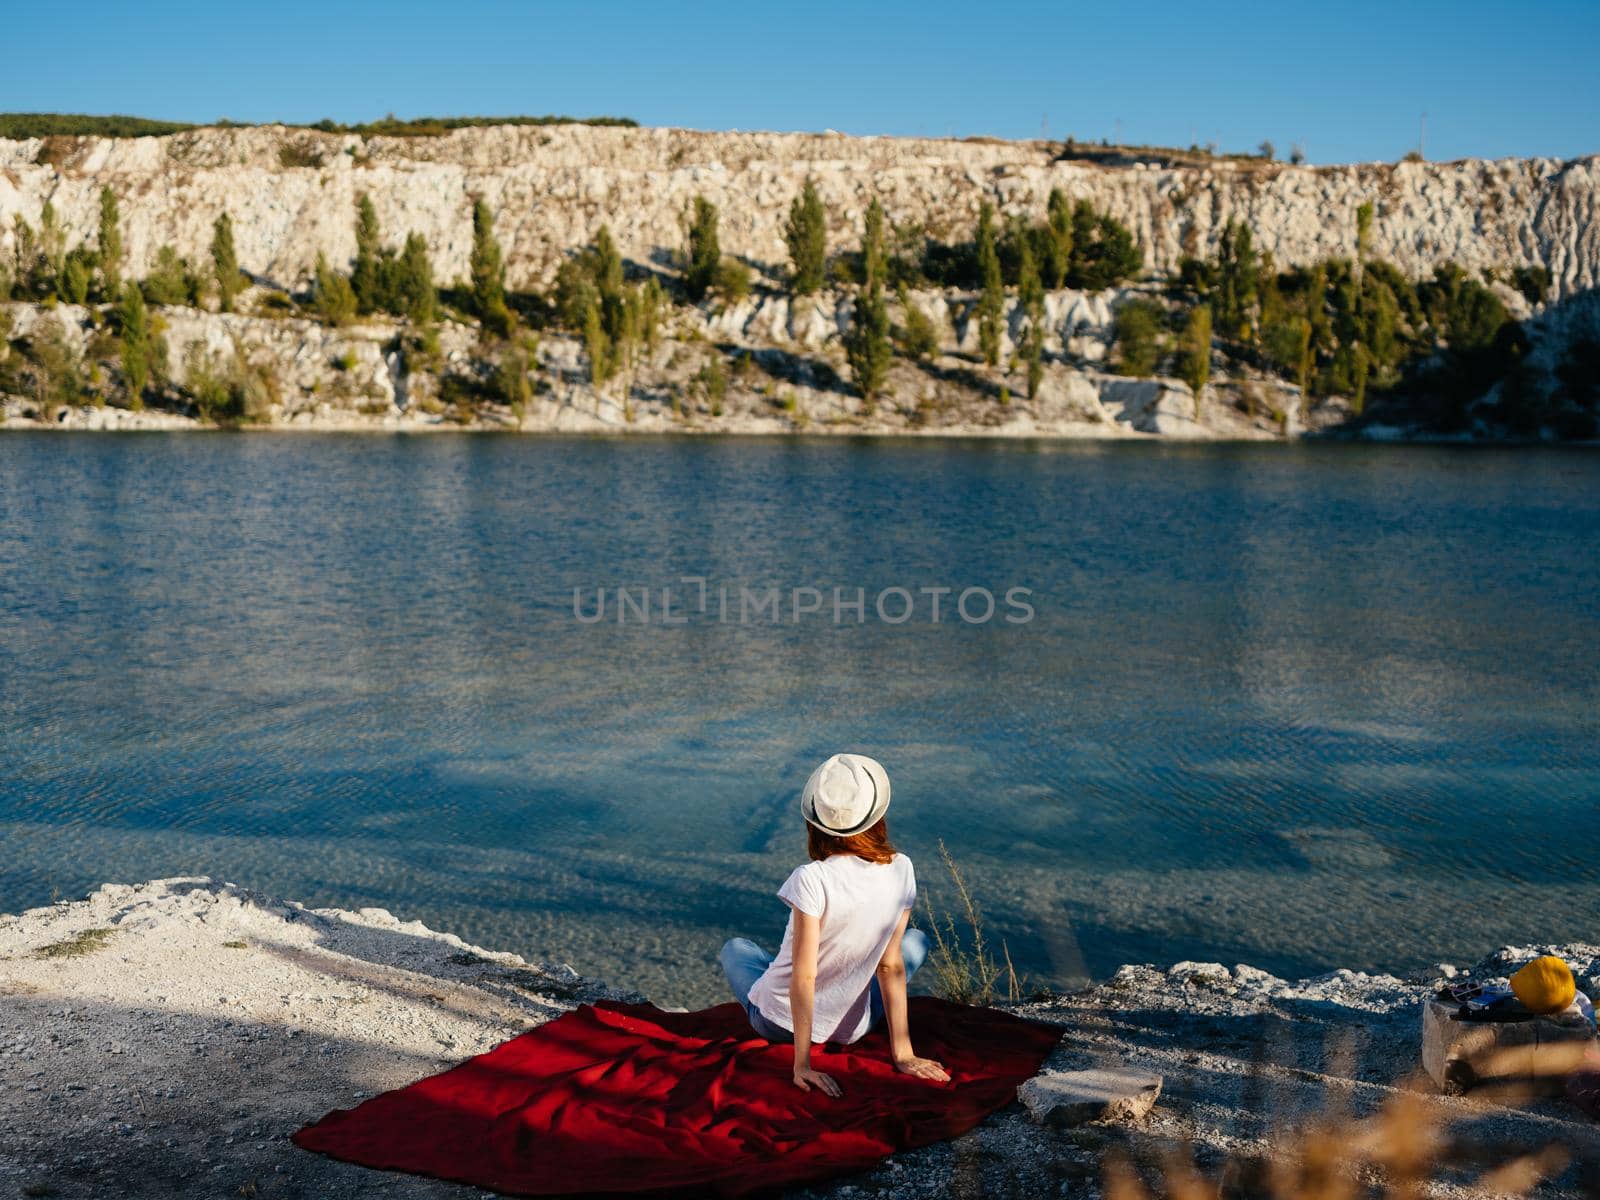 A traveler wearing a hat sits on a red cloth near the sea in nature by SHOTPRIME